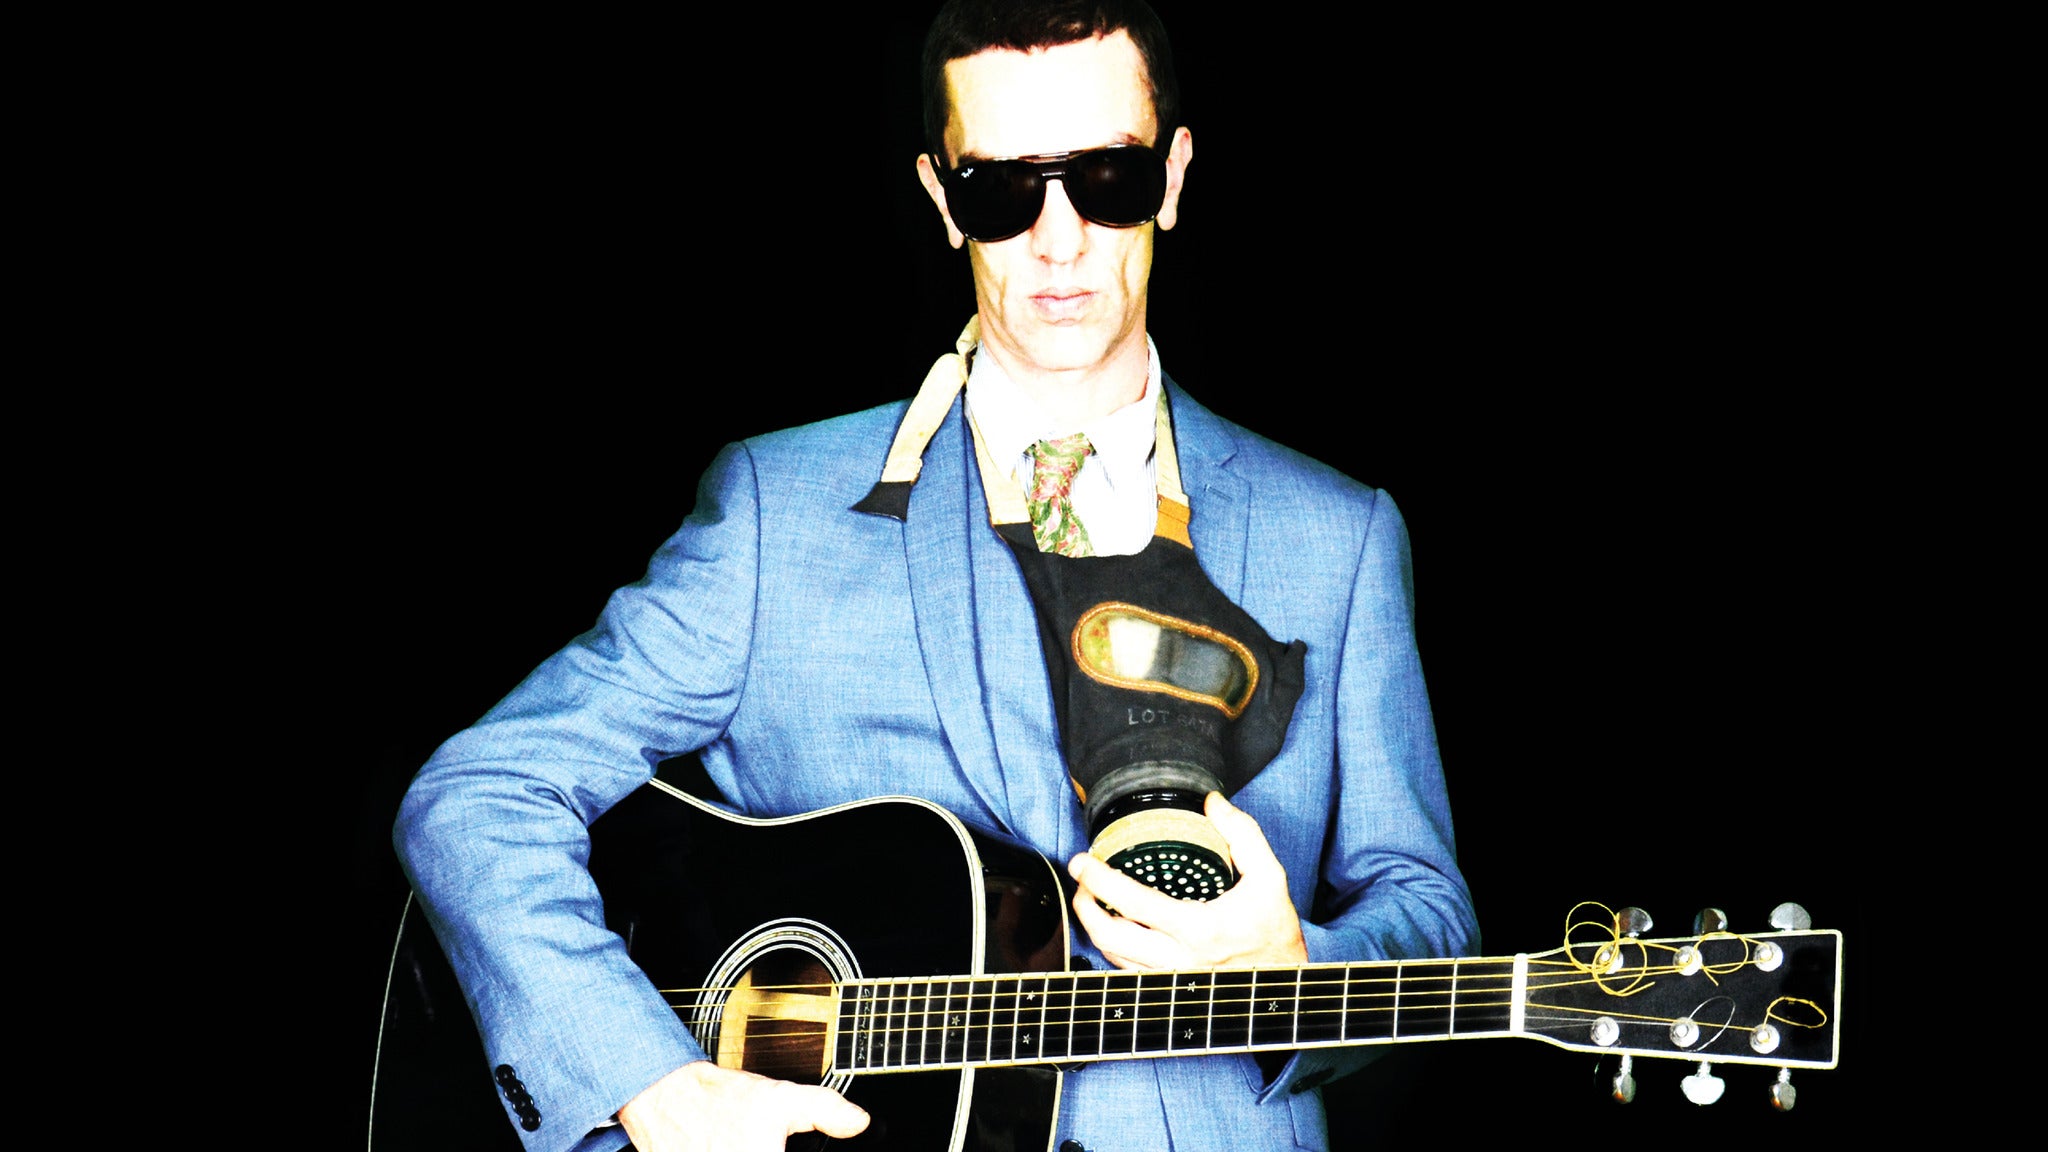 Kew the Music Presents Richard Ashcroft in London promo photo for Ticketmaster presale offer code